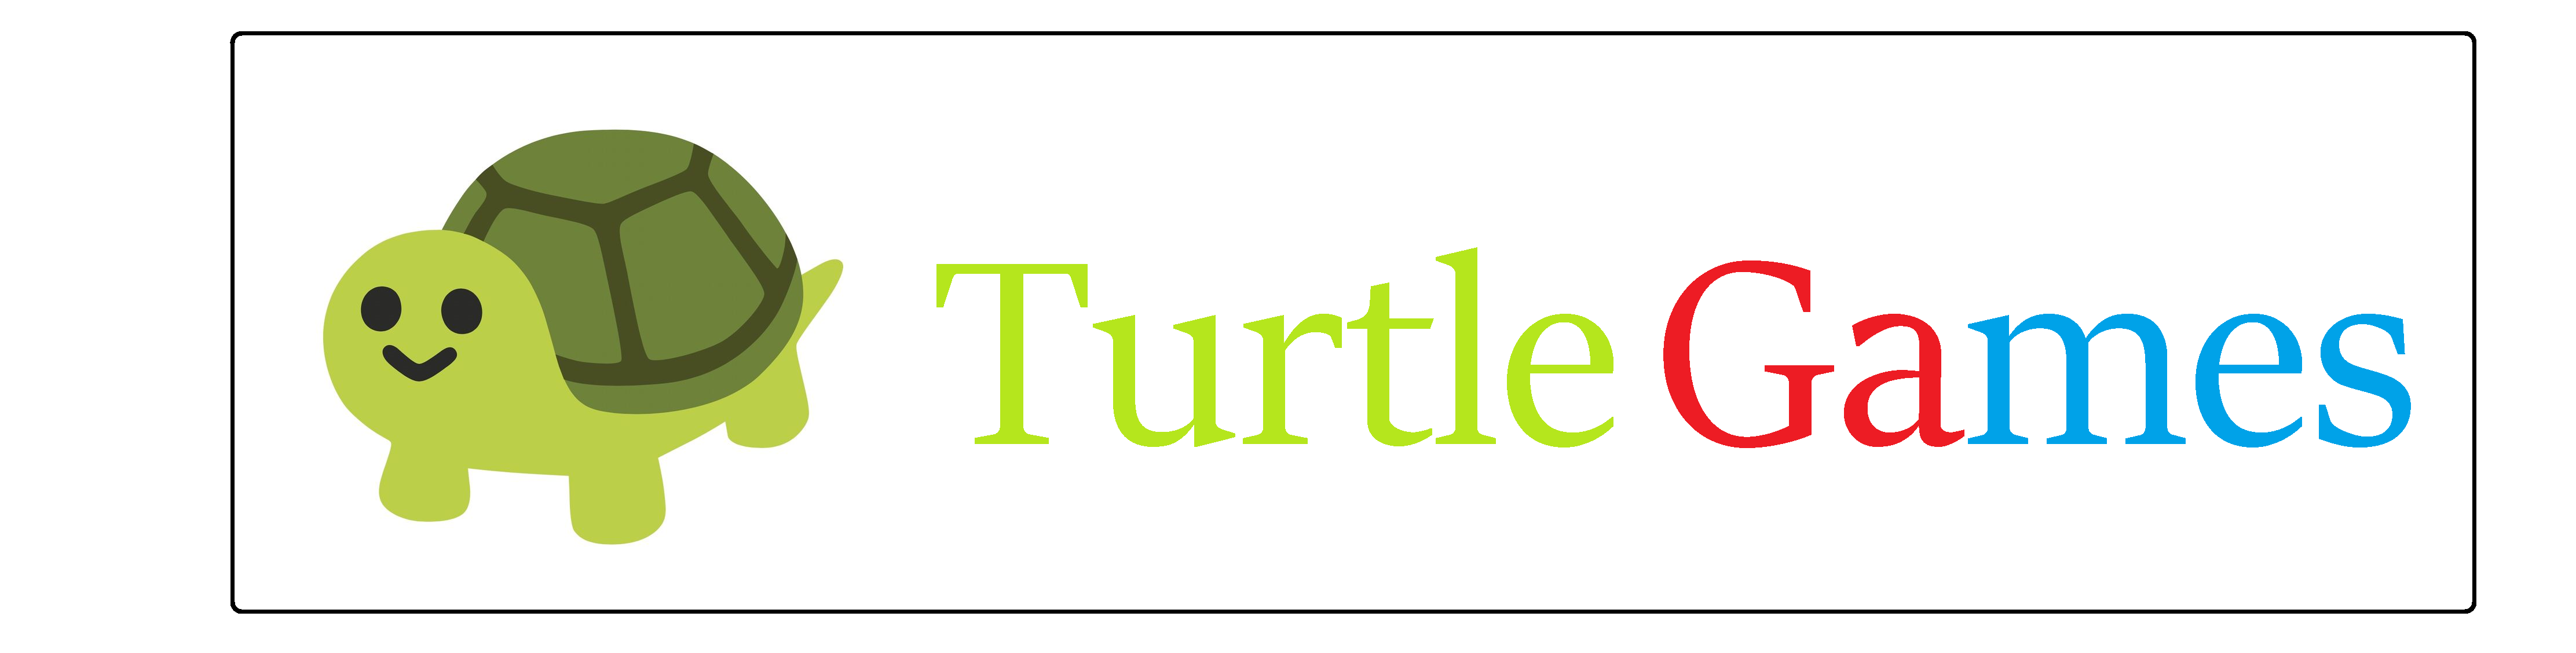 Turtle games 